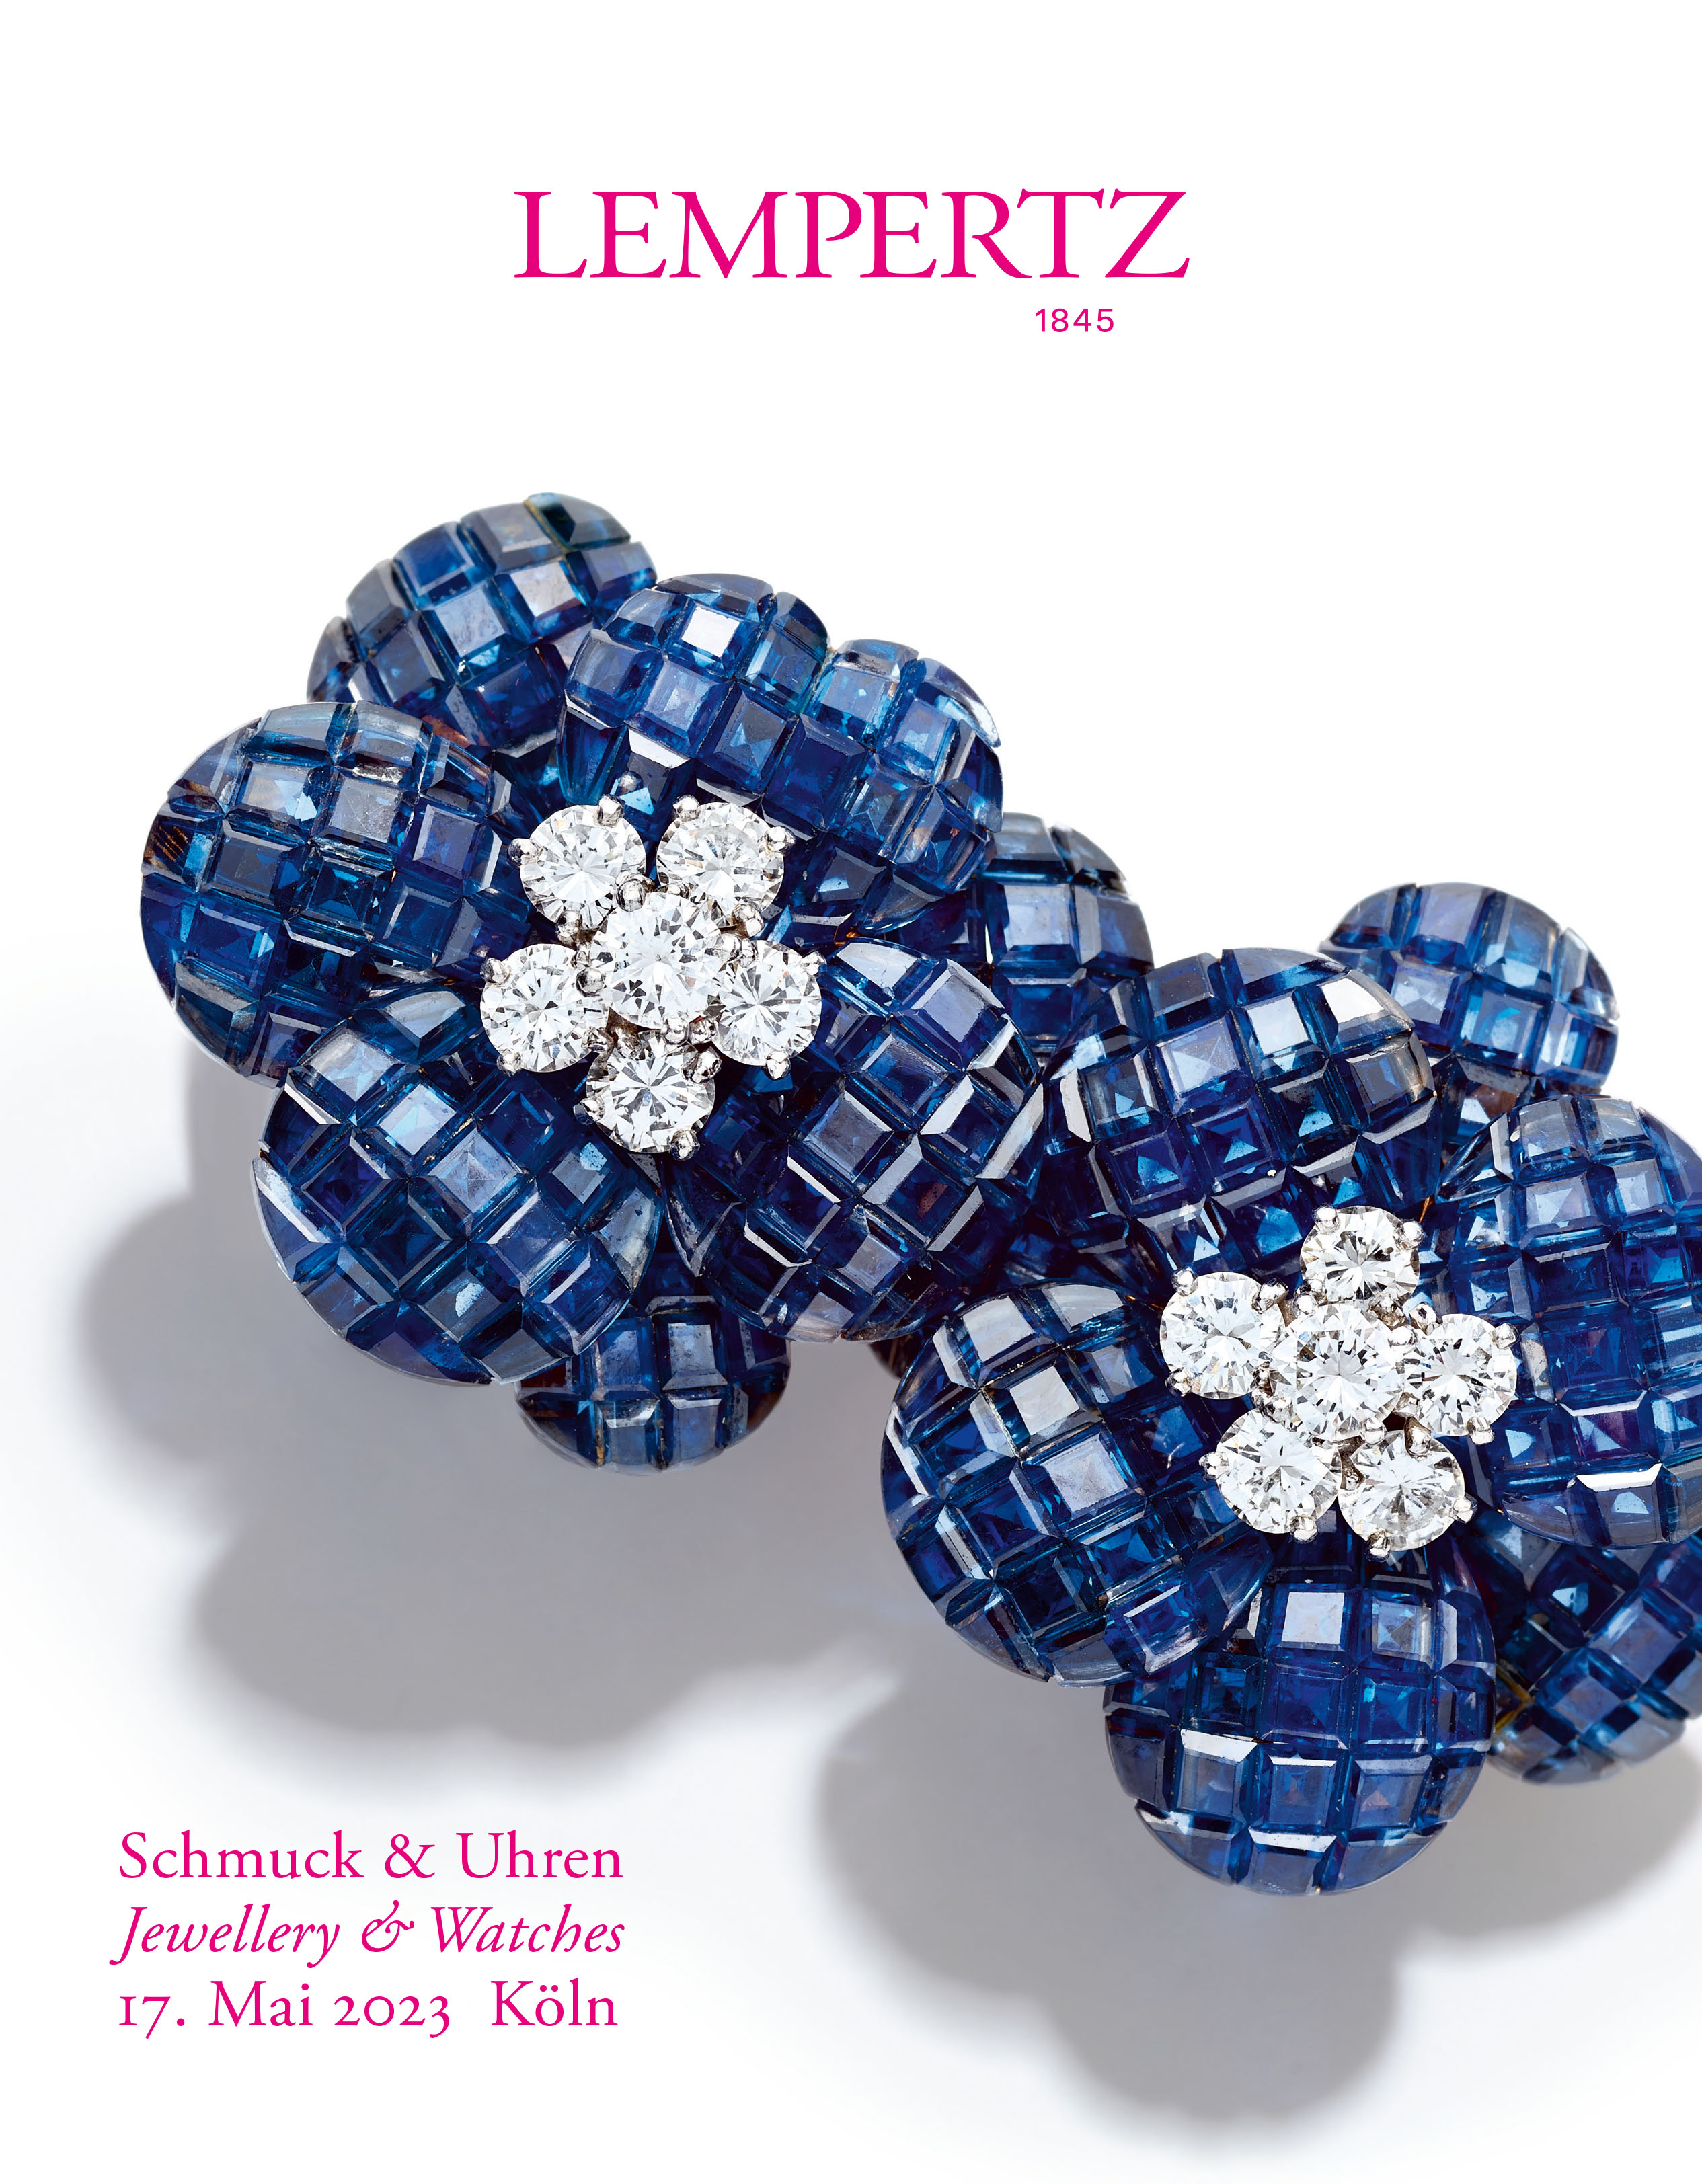 Catalogue - Jewellery and Watches - Online Catalogue - Auction 1219 – Purchase valuable works of art at the next Lempertz-Auction!